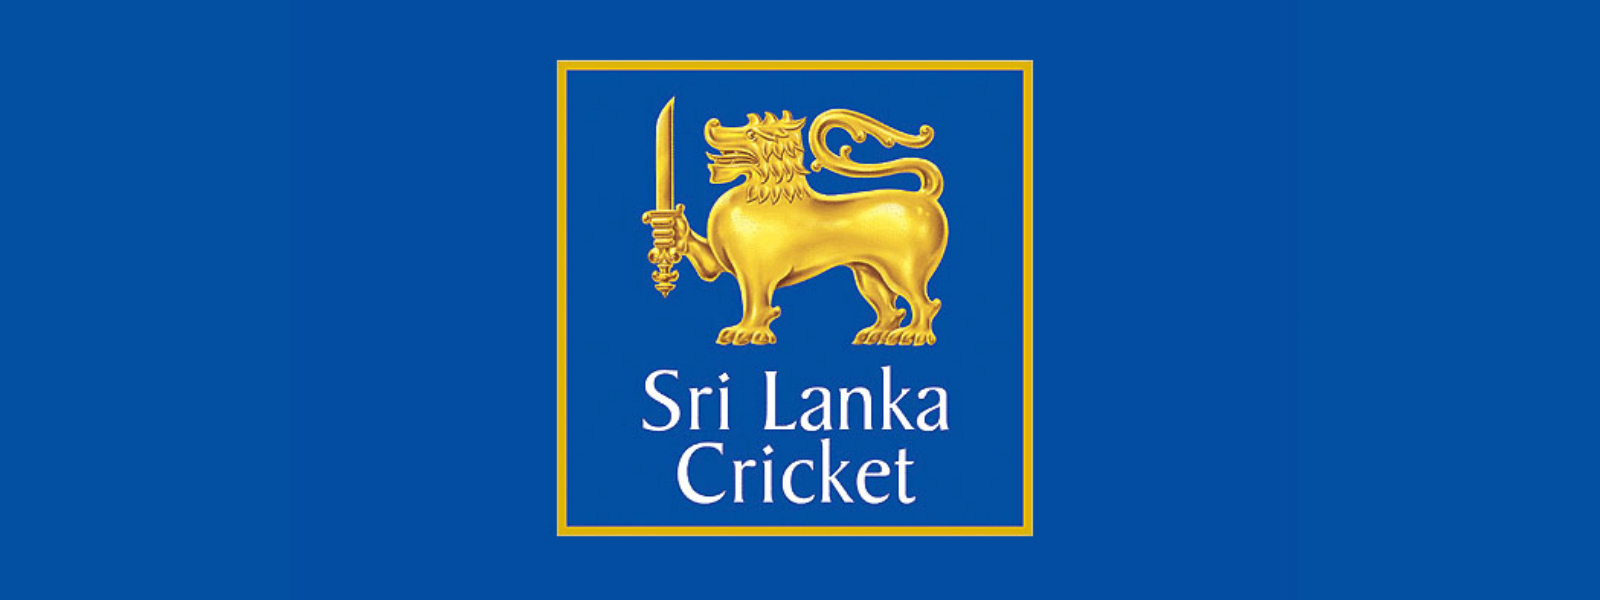 Is Sri Lankan Cricket ready for ICC World Cup?